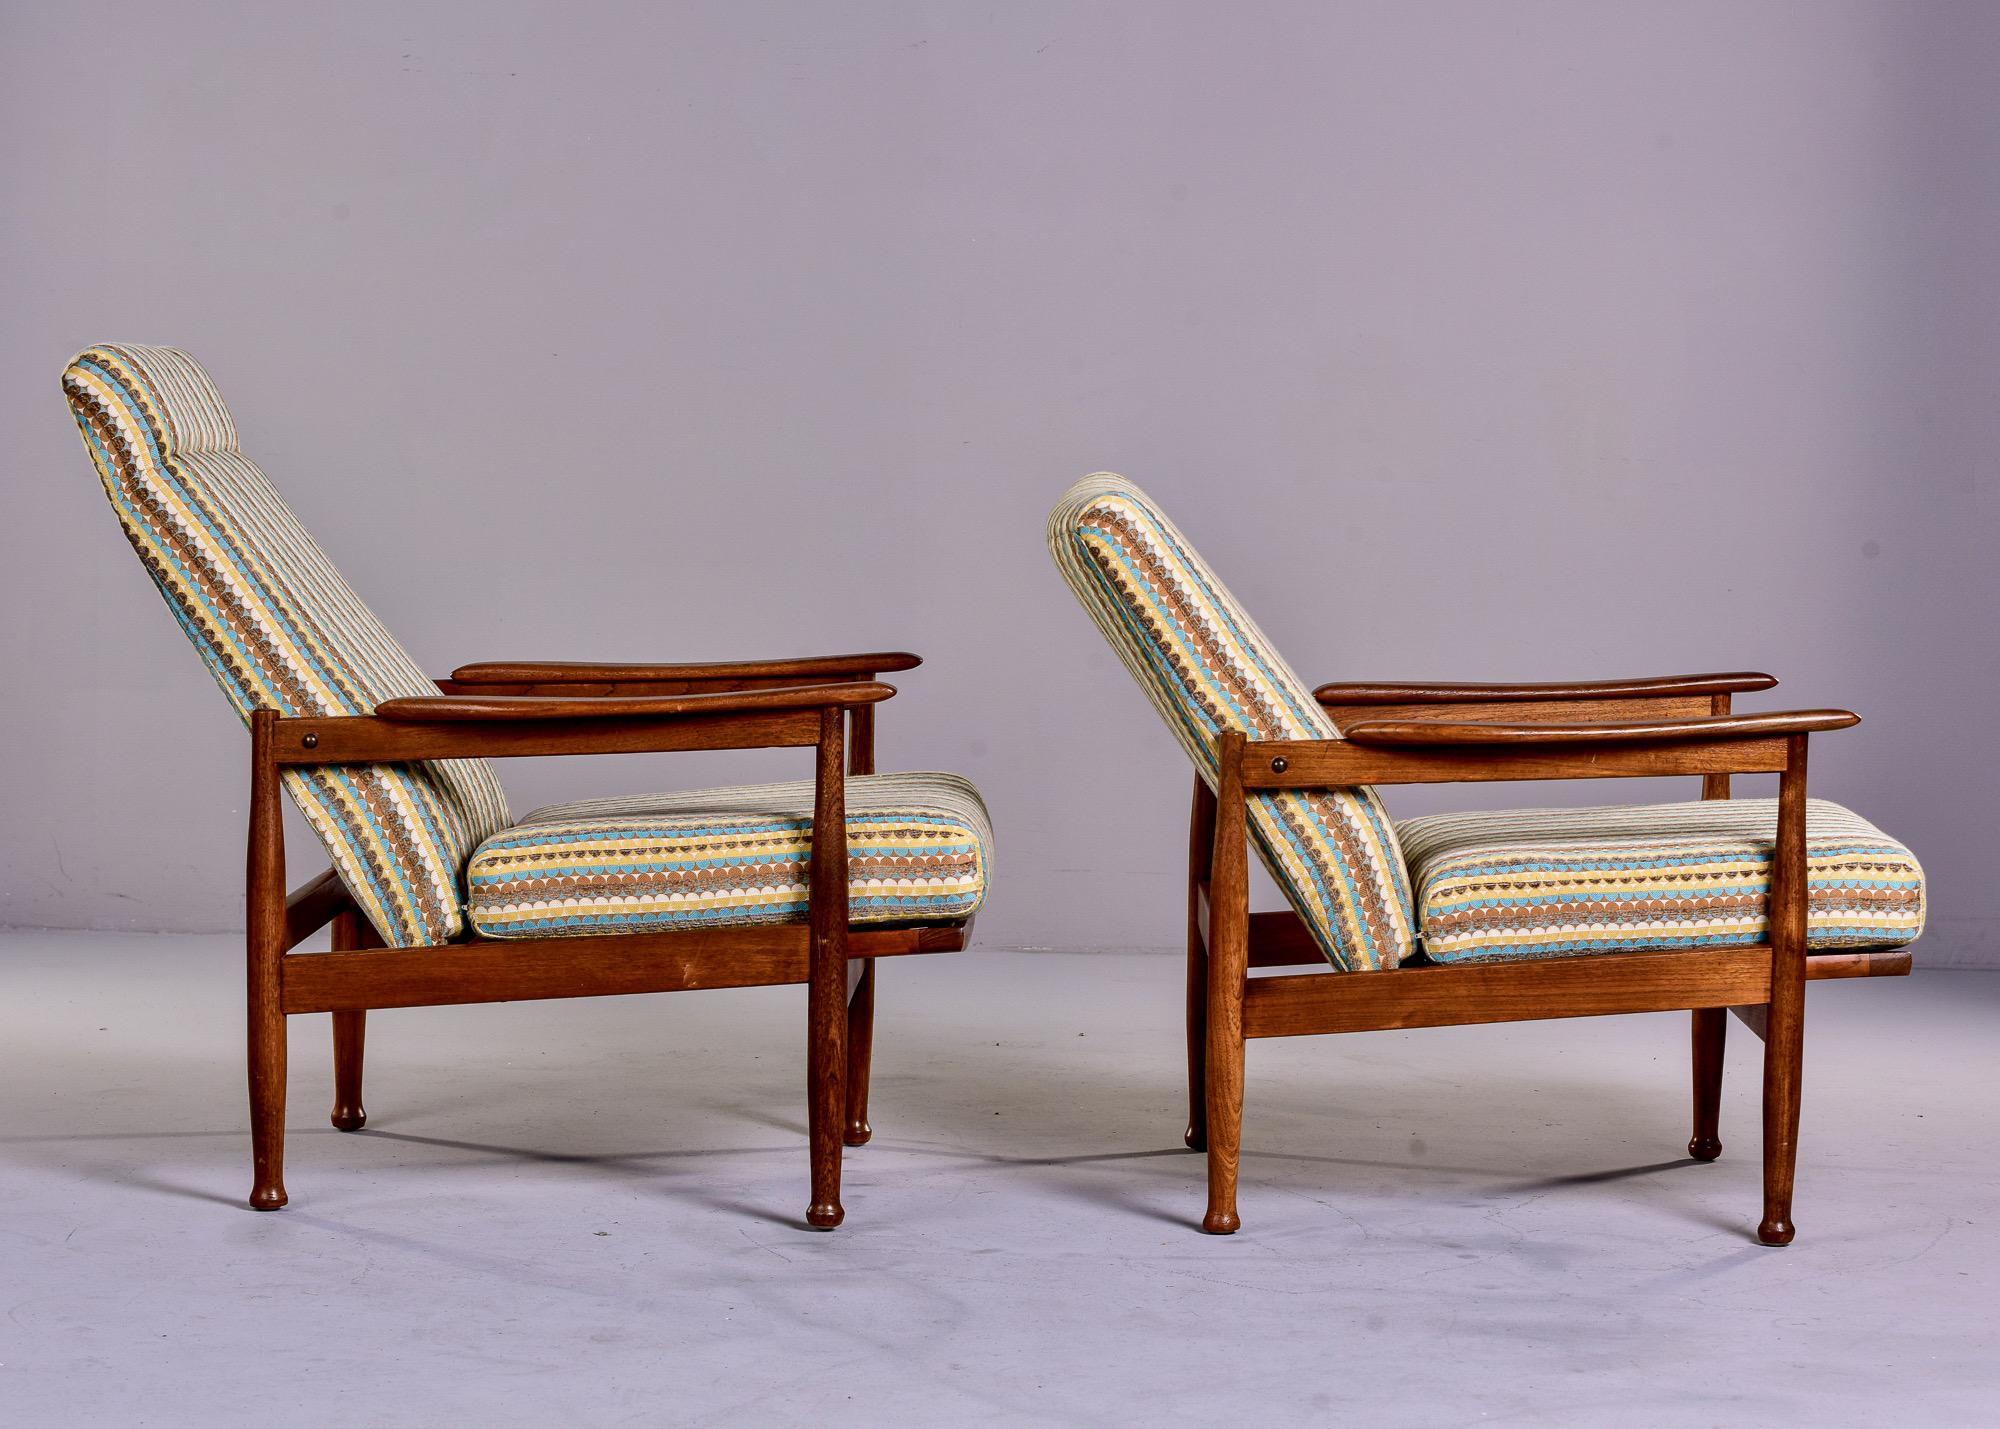 Upholstery Near Pair Mid Century Scandinavian Reclining Elm Chairs For Sale